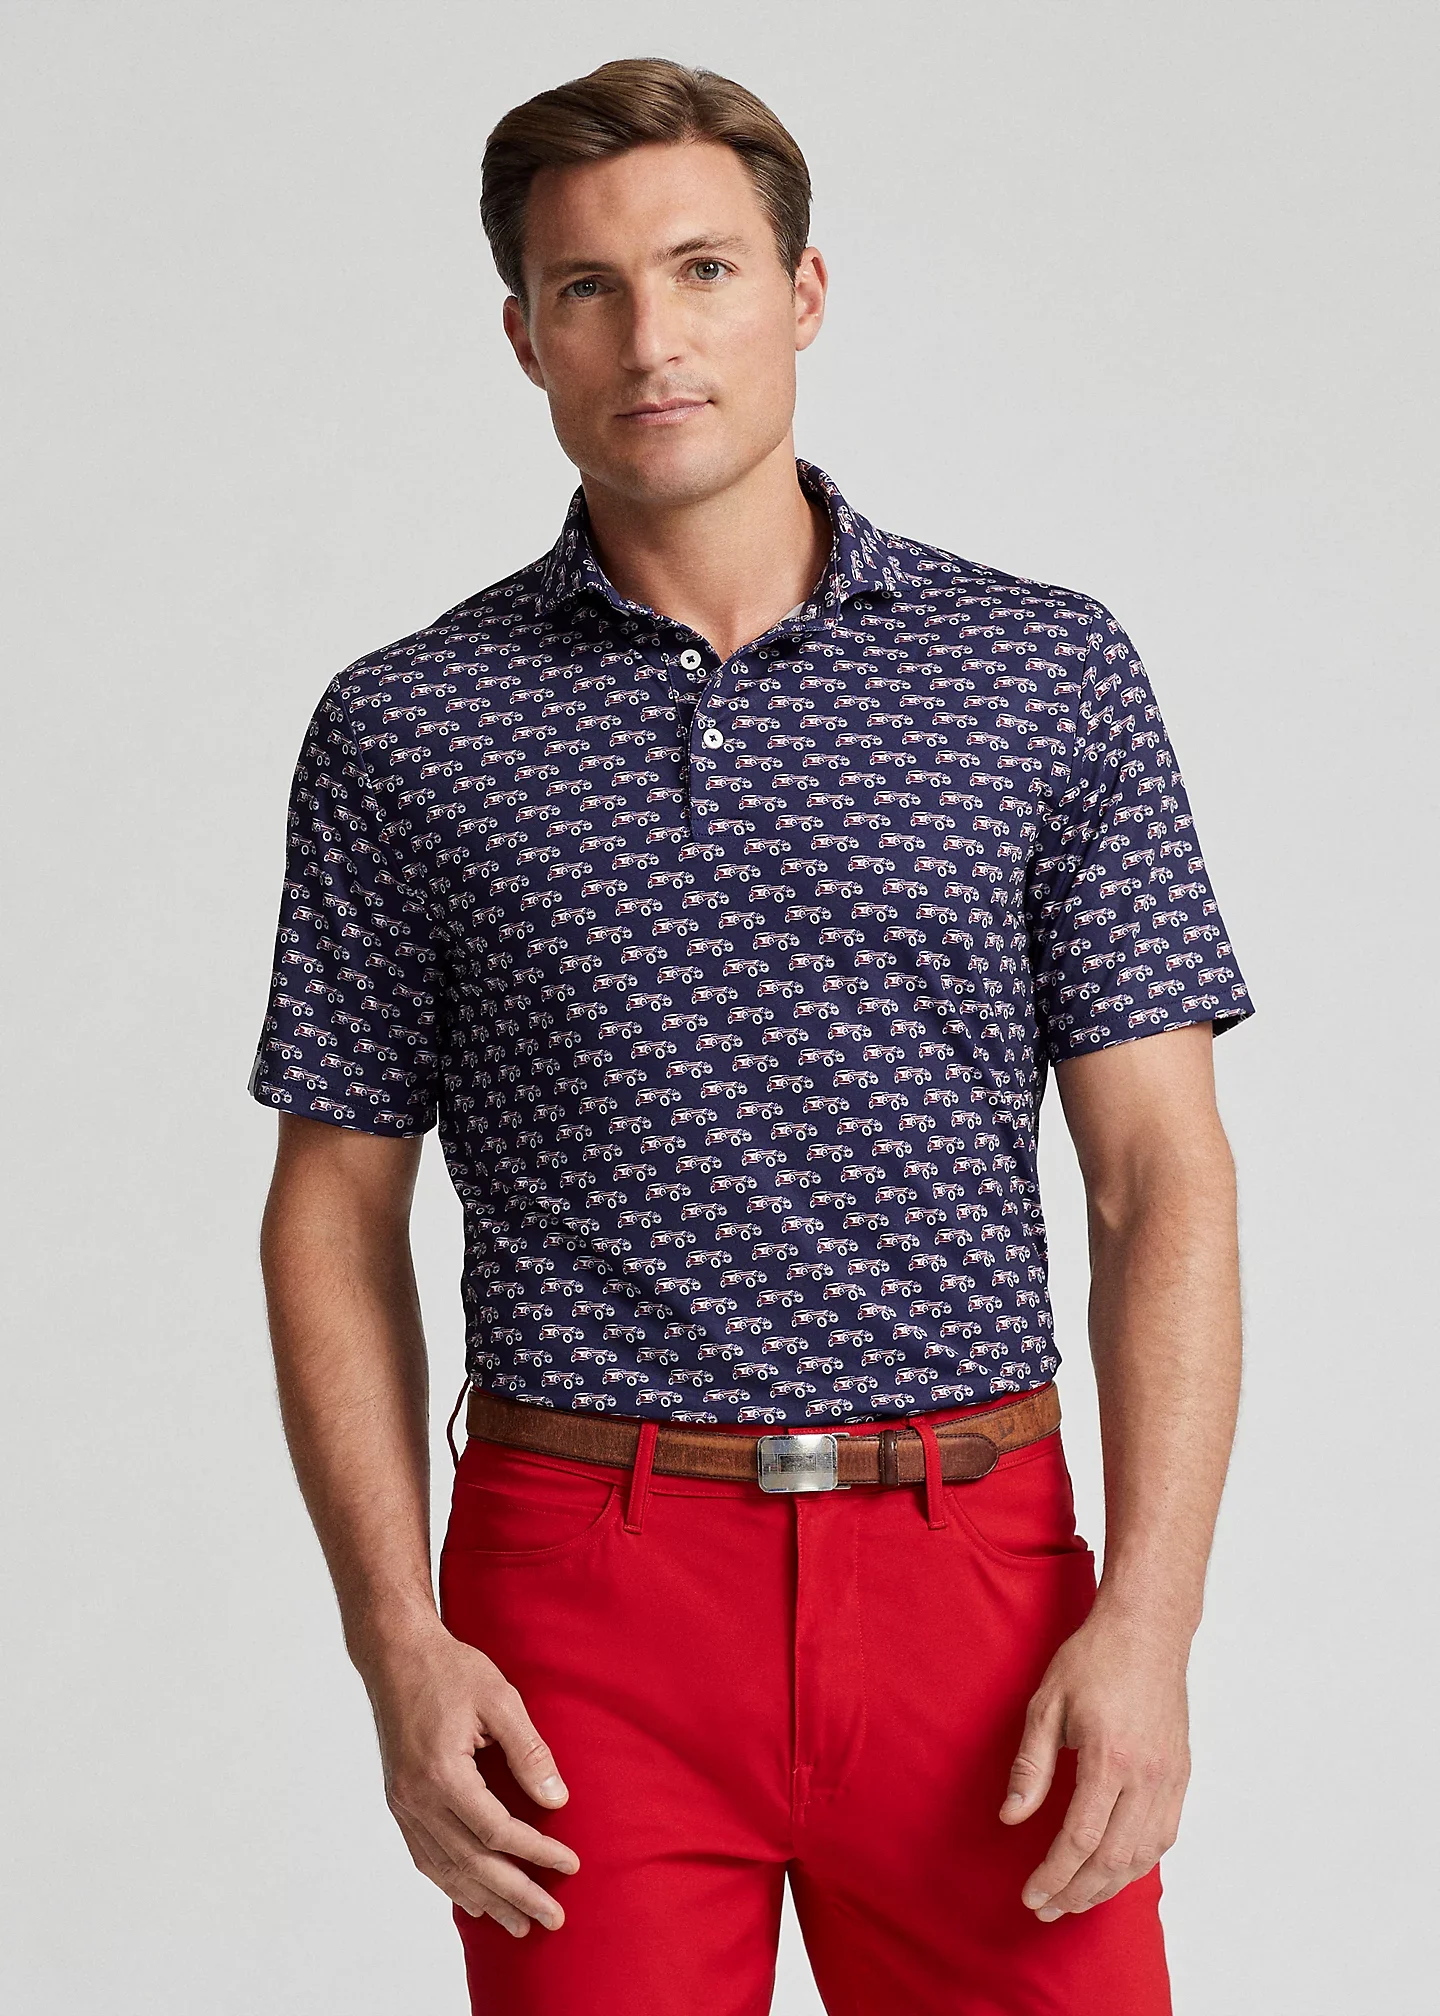 Polo RLX golf apparel is perfect for on and off the course